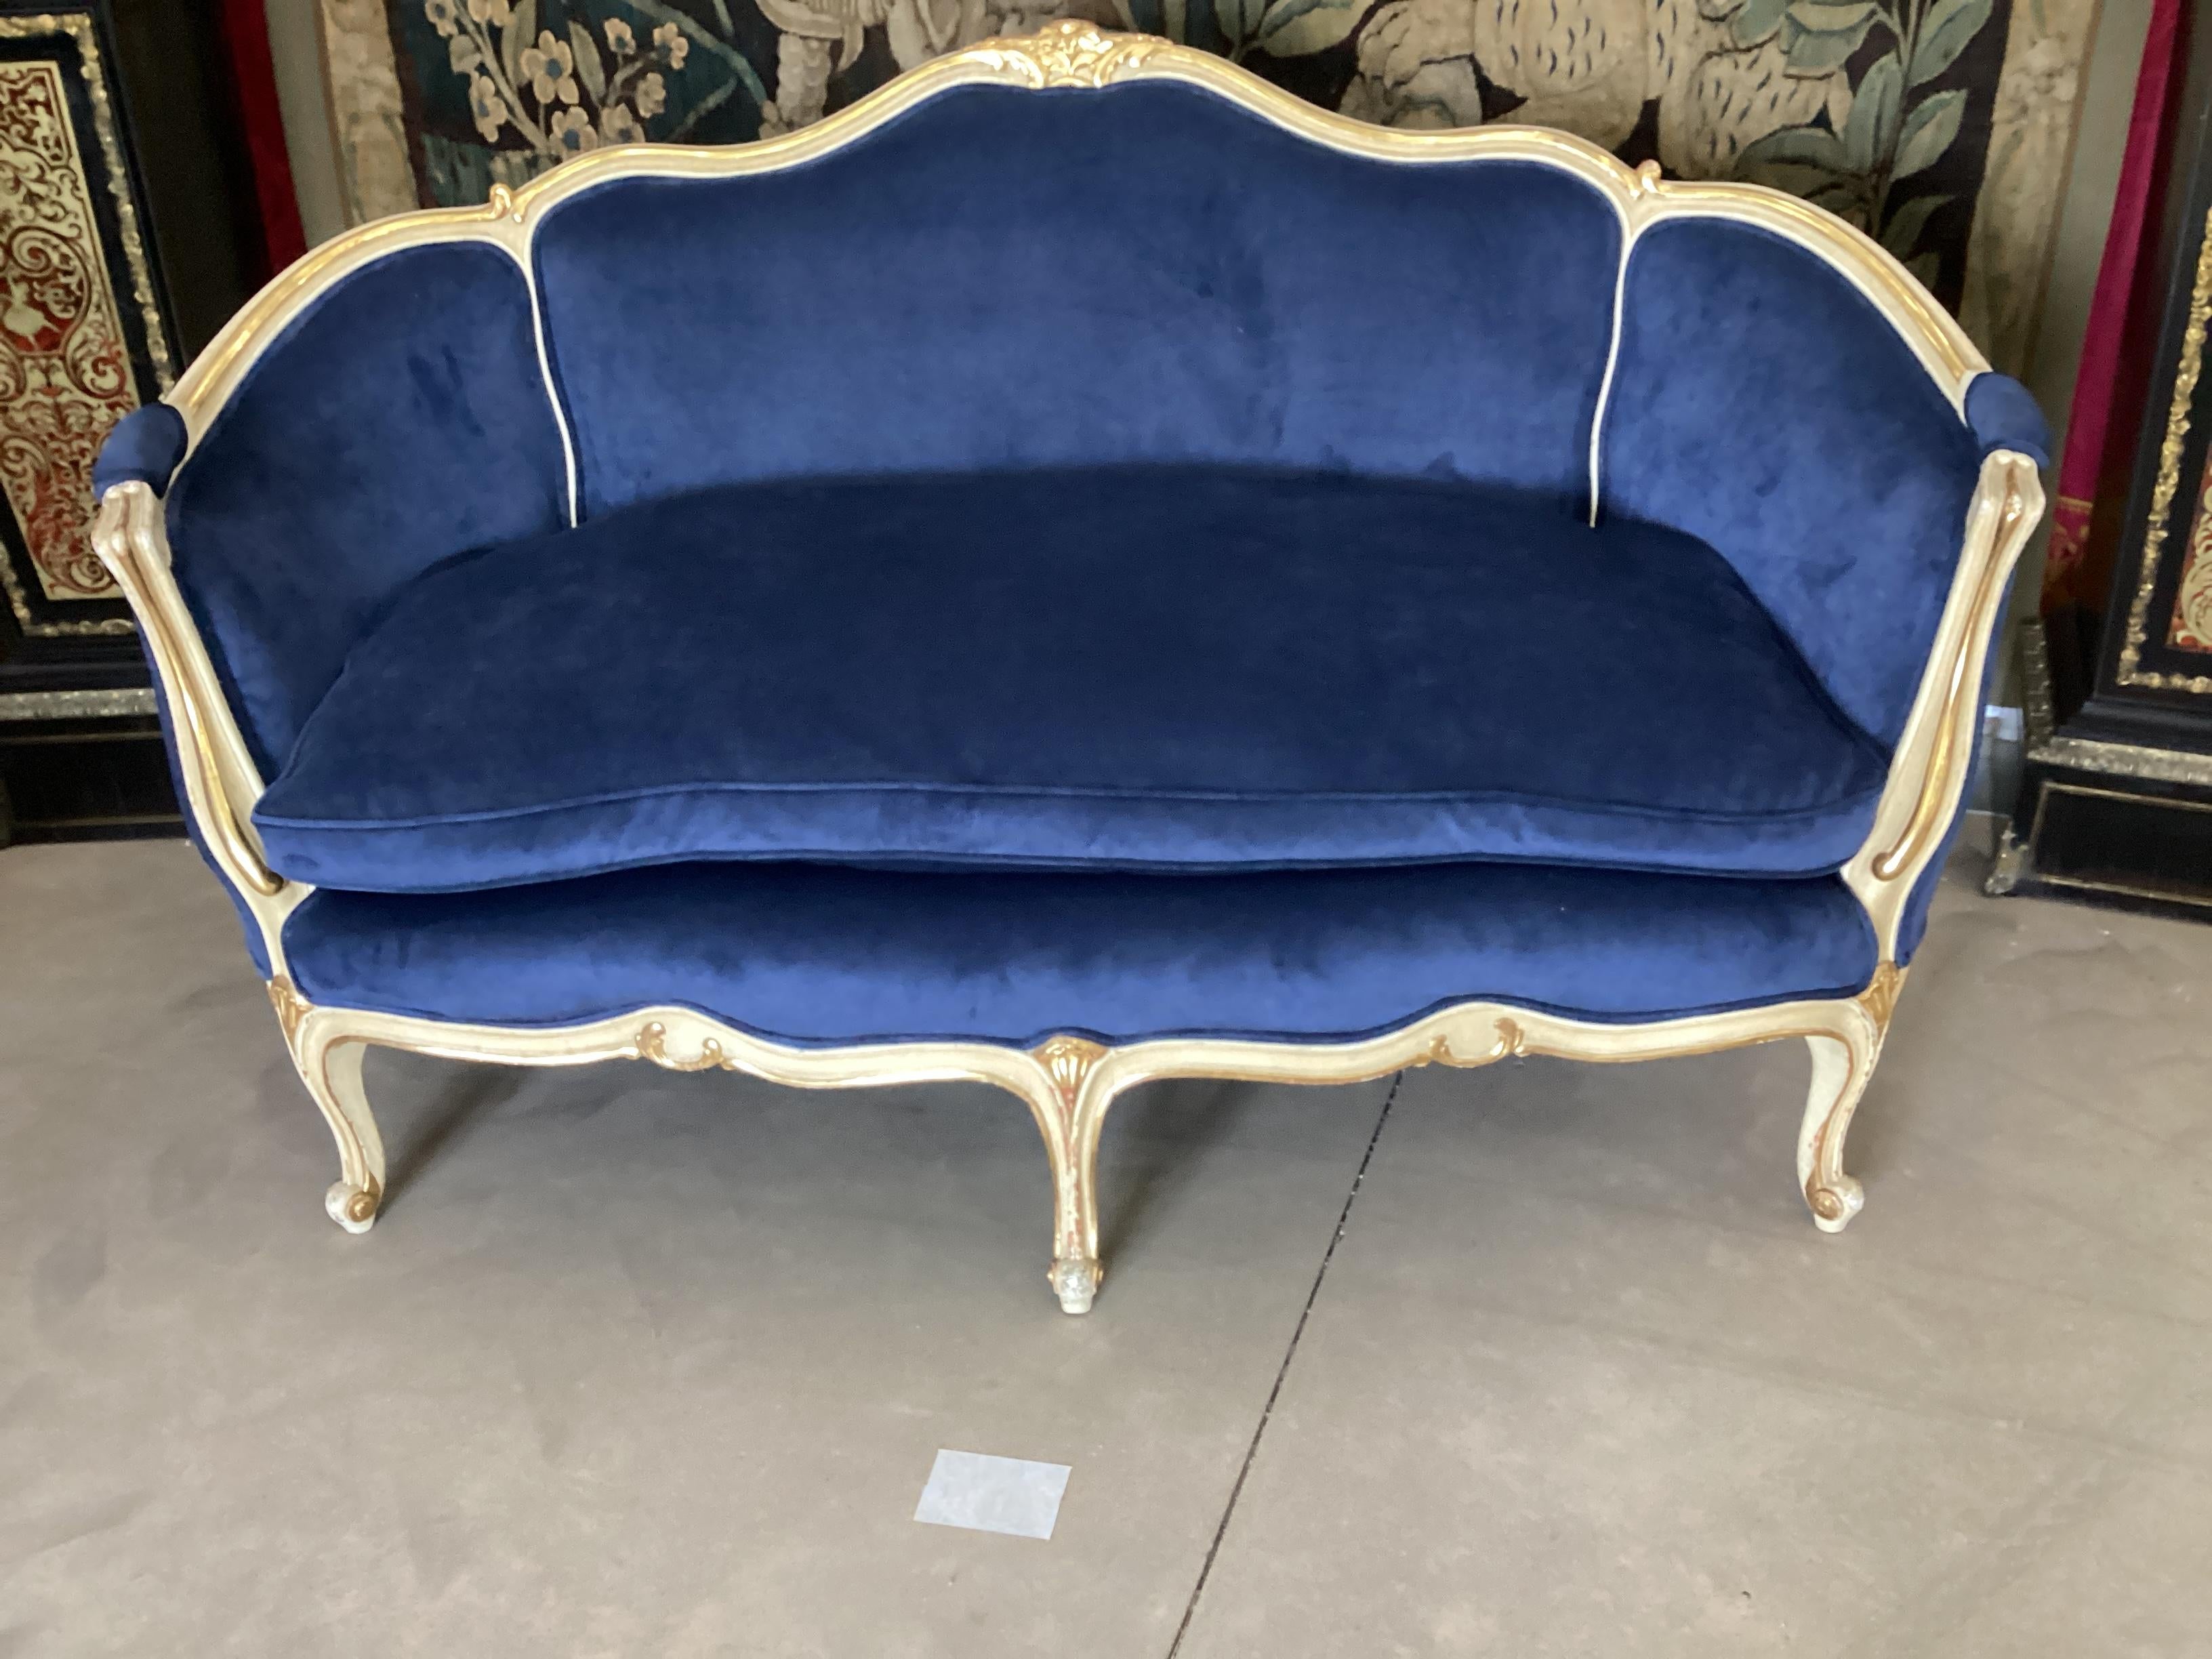 Antique Louis XV Style Painted and Gilt Settee. This is one of a pair and priced individually. Newly upholstered in a blue velvet fabric. Cream painted frame with gilt accents on typical 
Louis  XV  style scrolling legs.